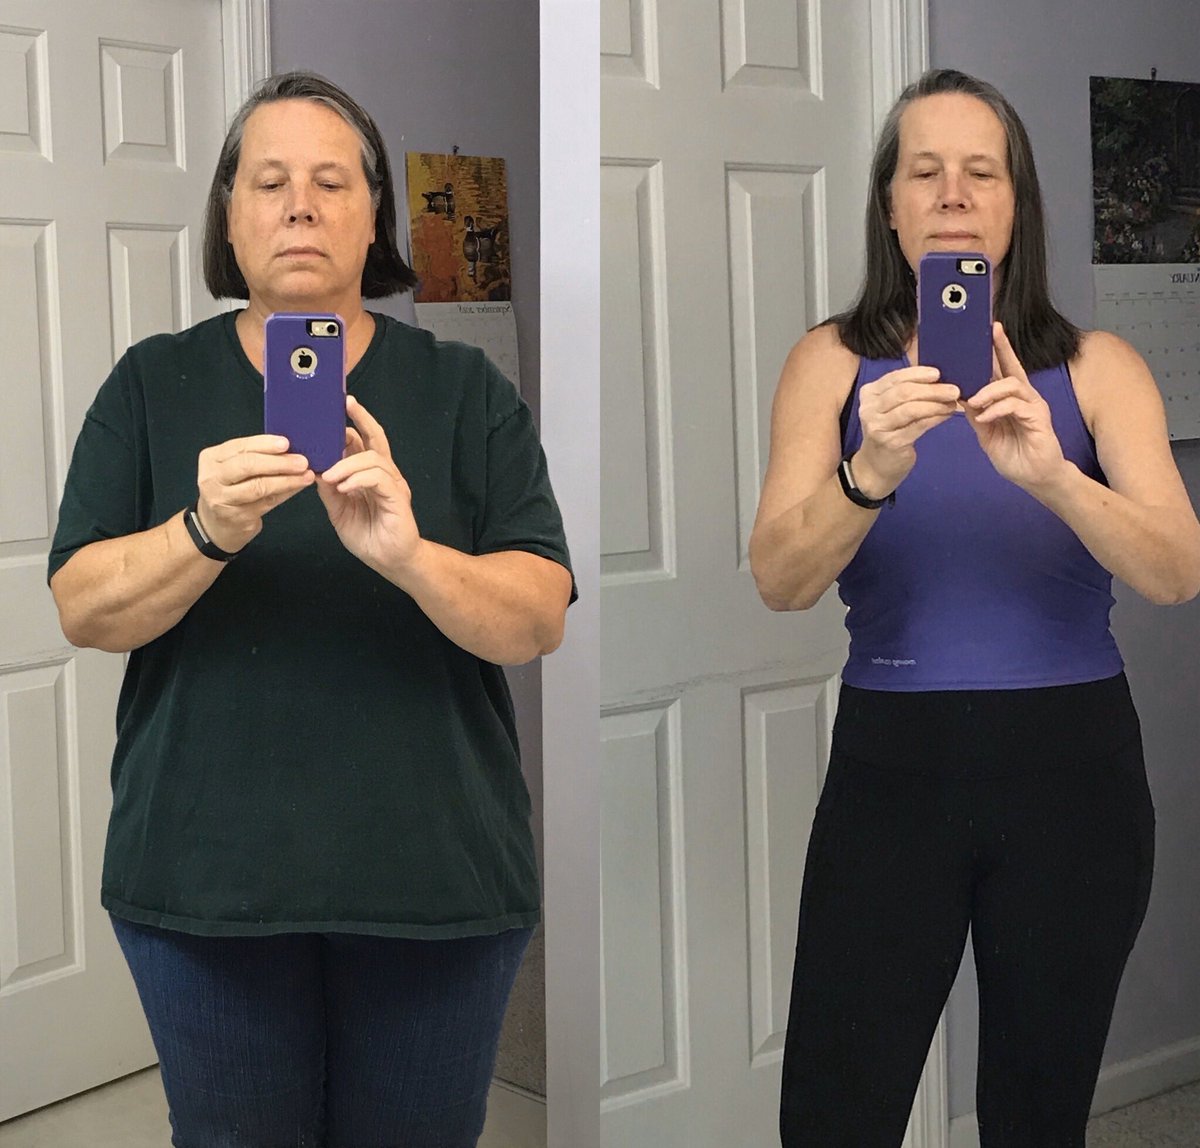 I am 61 years old. I am disabled (Ehlers Danlos Syndrome.) I have been eating keto/low carb/ IF for the past not quite 17 months. No exercise. 100 pounds lost. If I can do it, anyone can do it. Can’t wait to add some weight lifting and see what happens. #KeyoSuccessStory